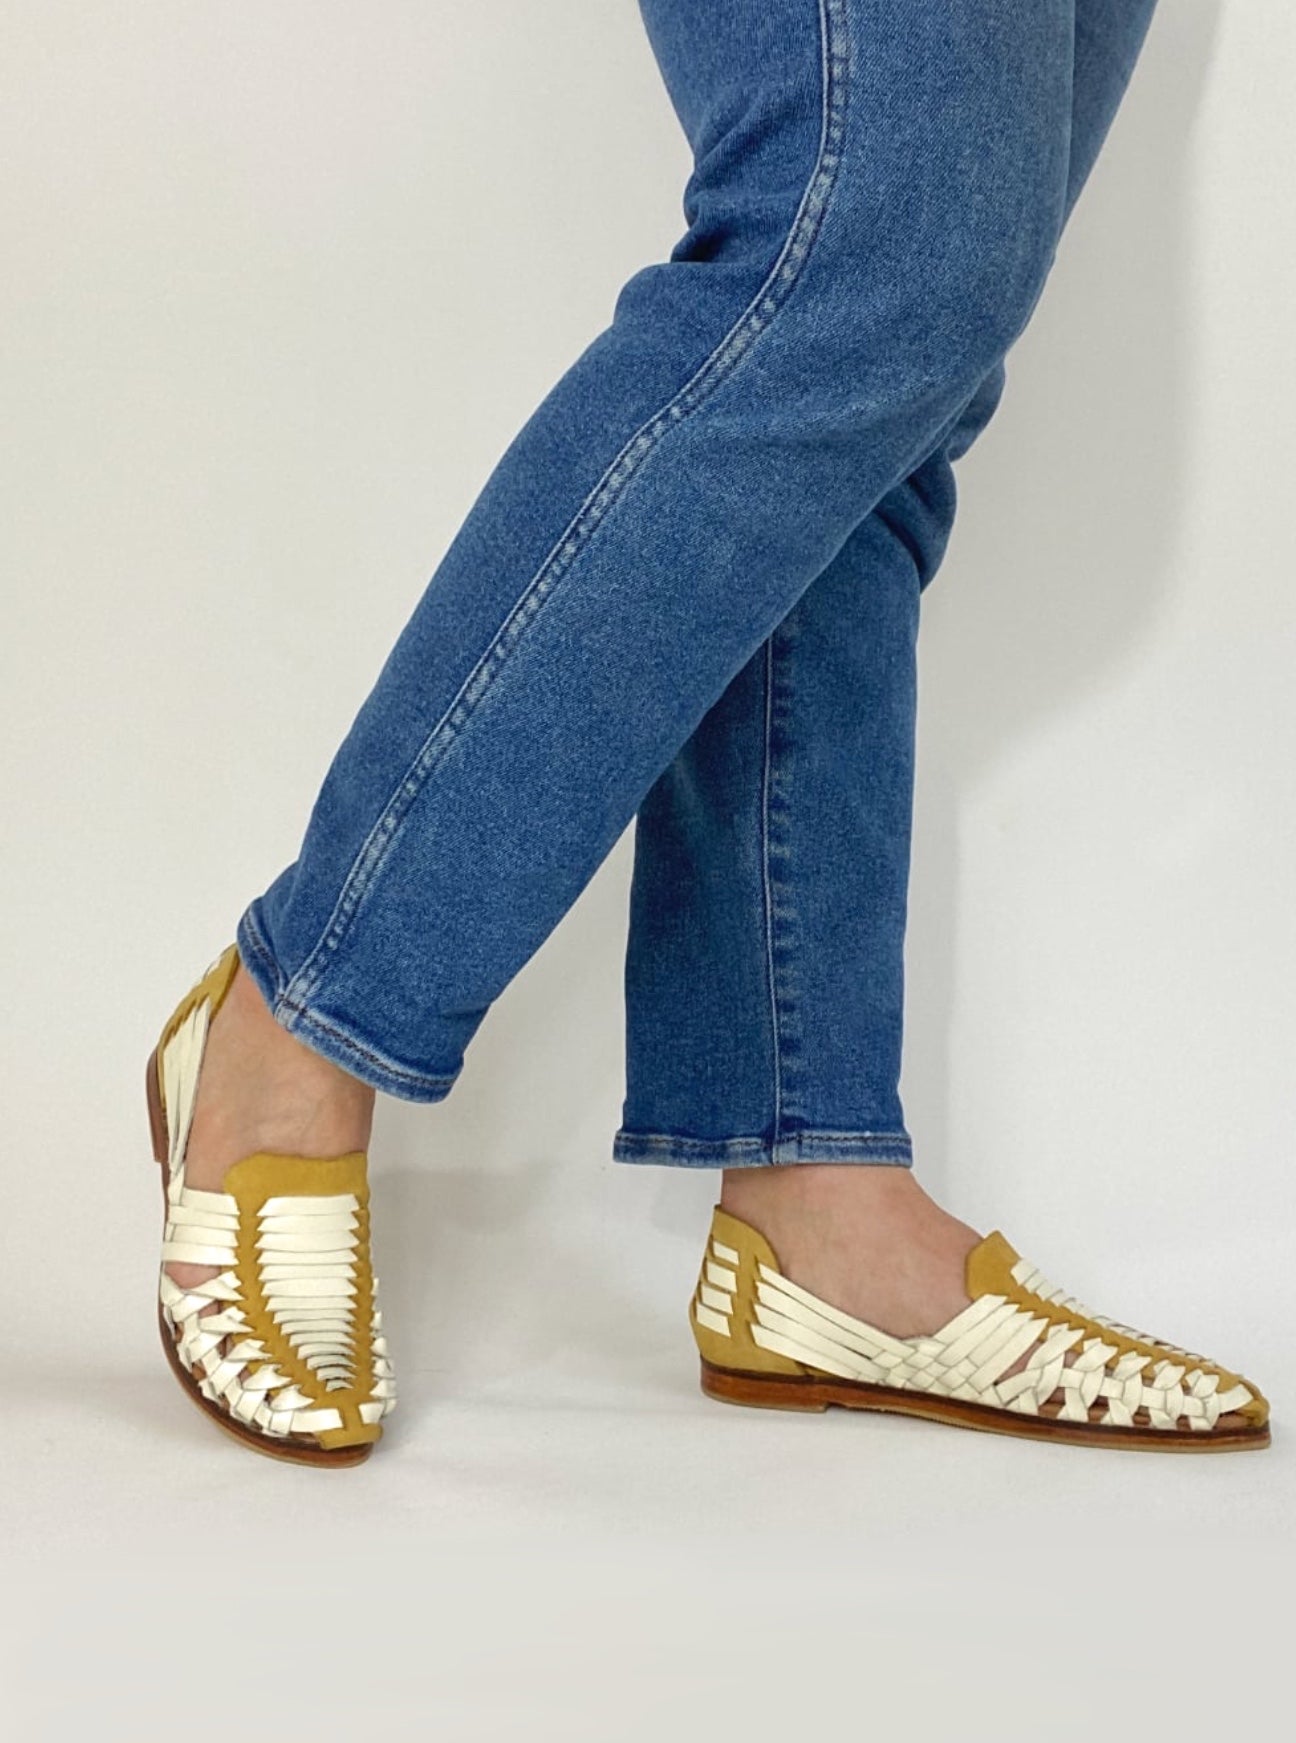 Piper Flat in Marigold Nubuck and Cream Leather (PREORDER)